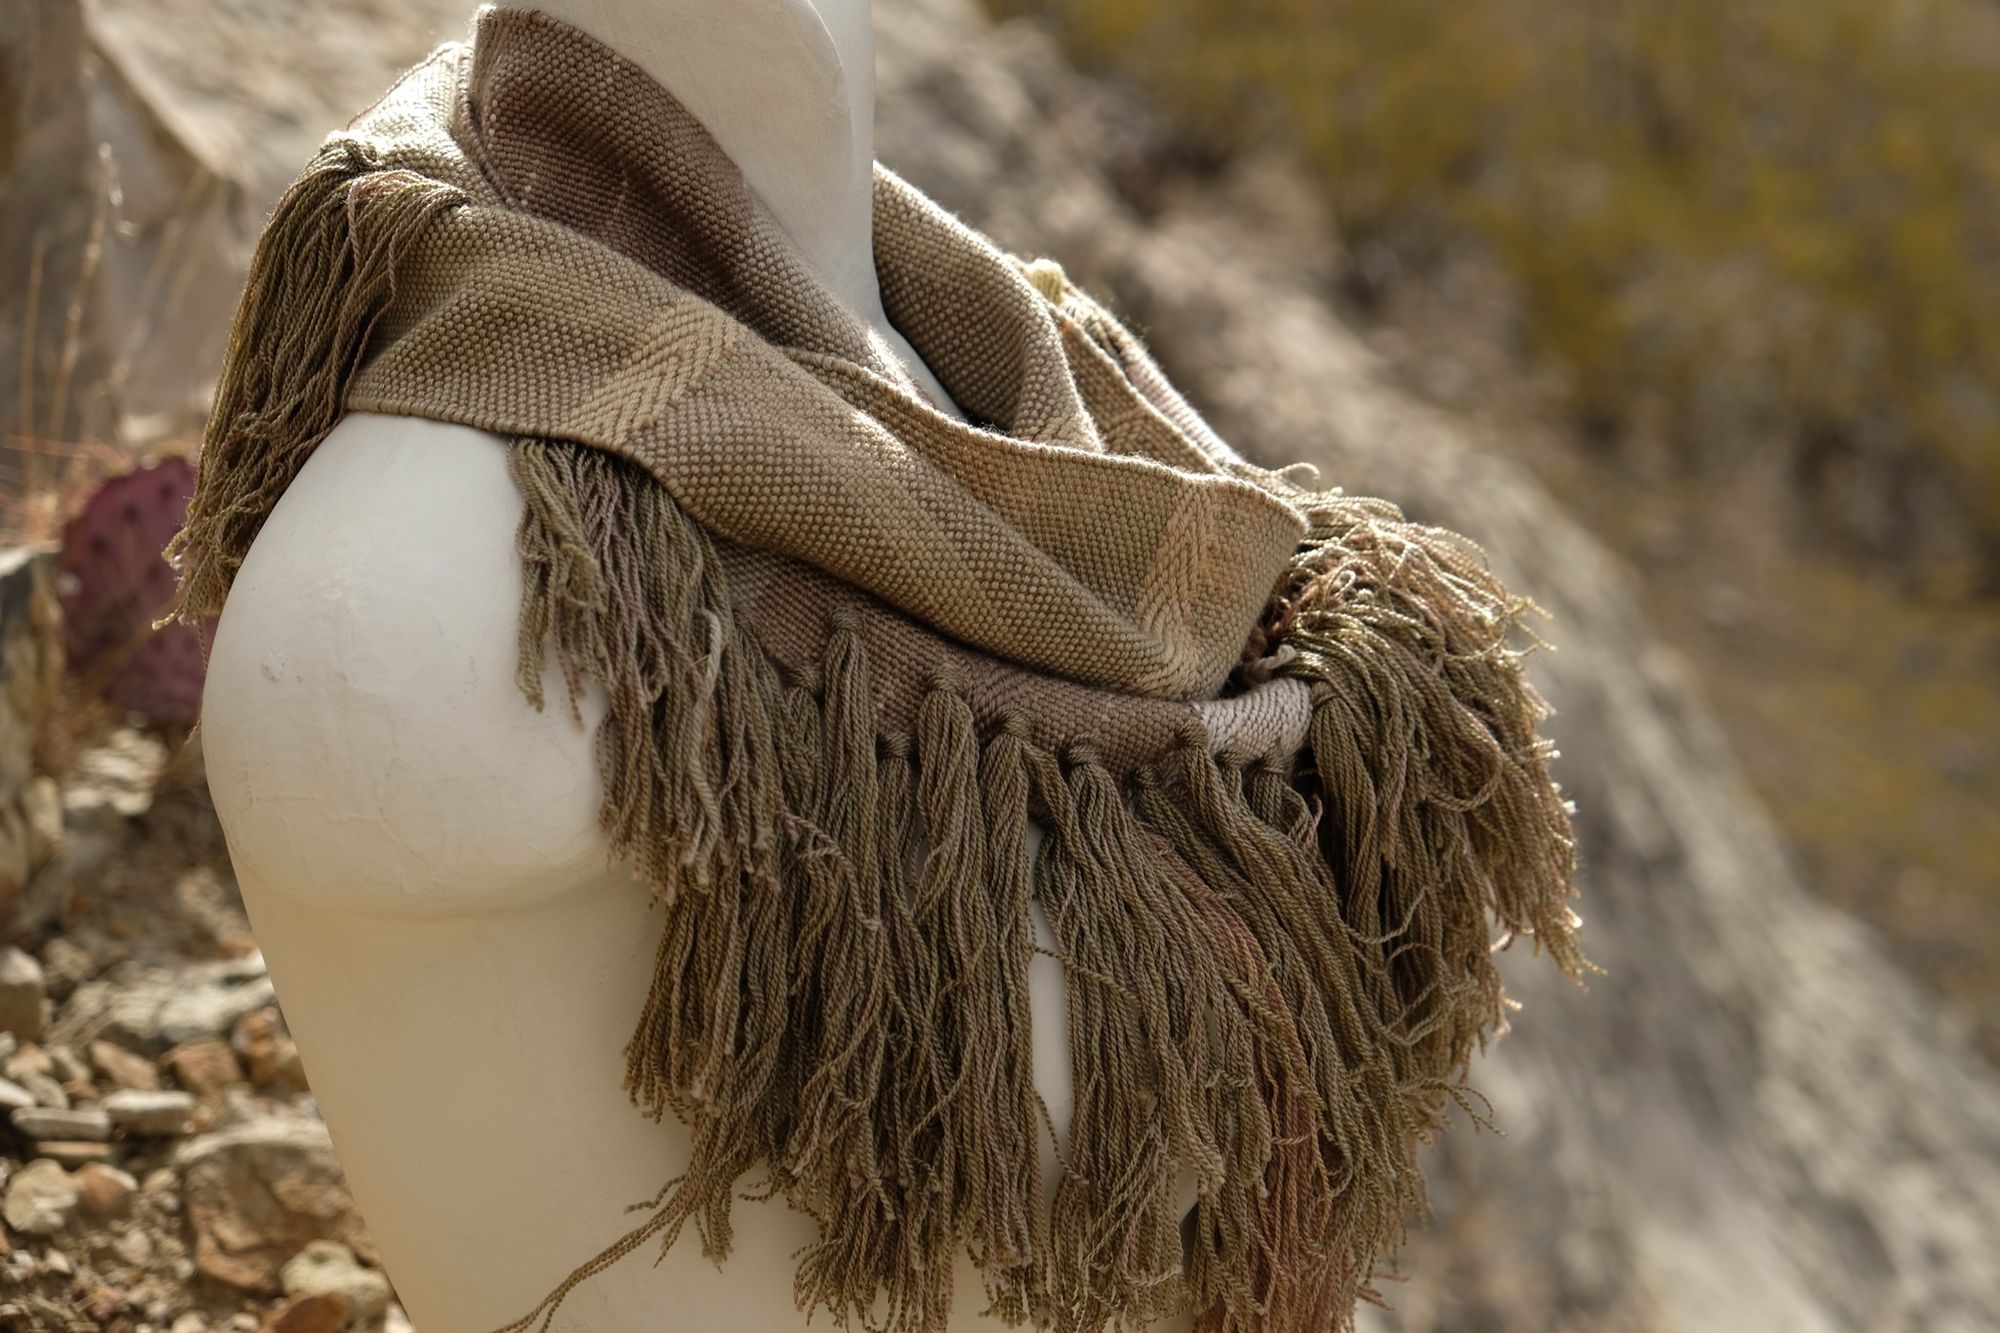 naturally dyed brown, green and tan fringed infinity scarf on a white mannequin bust in the desert